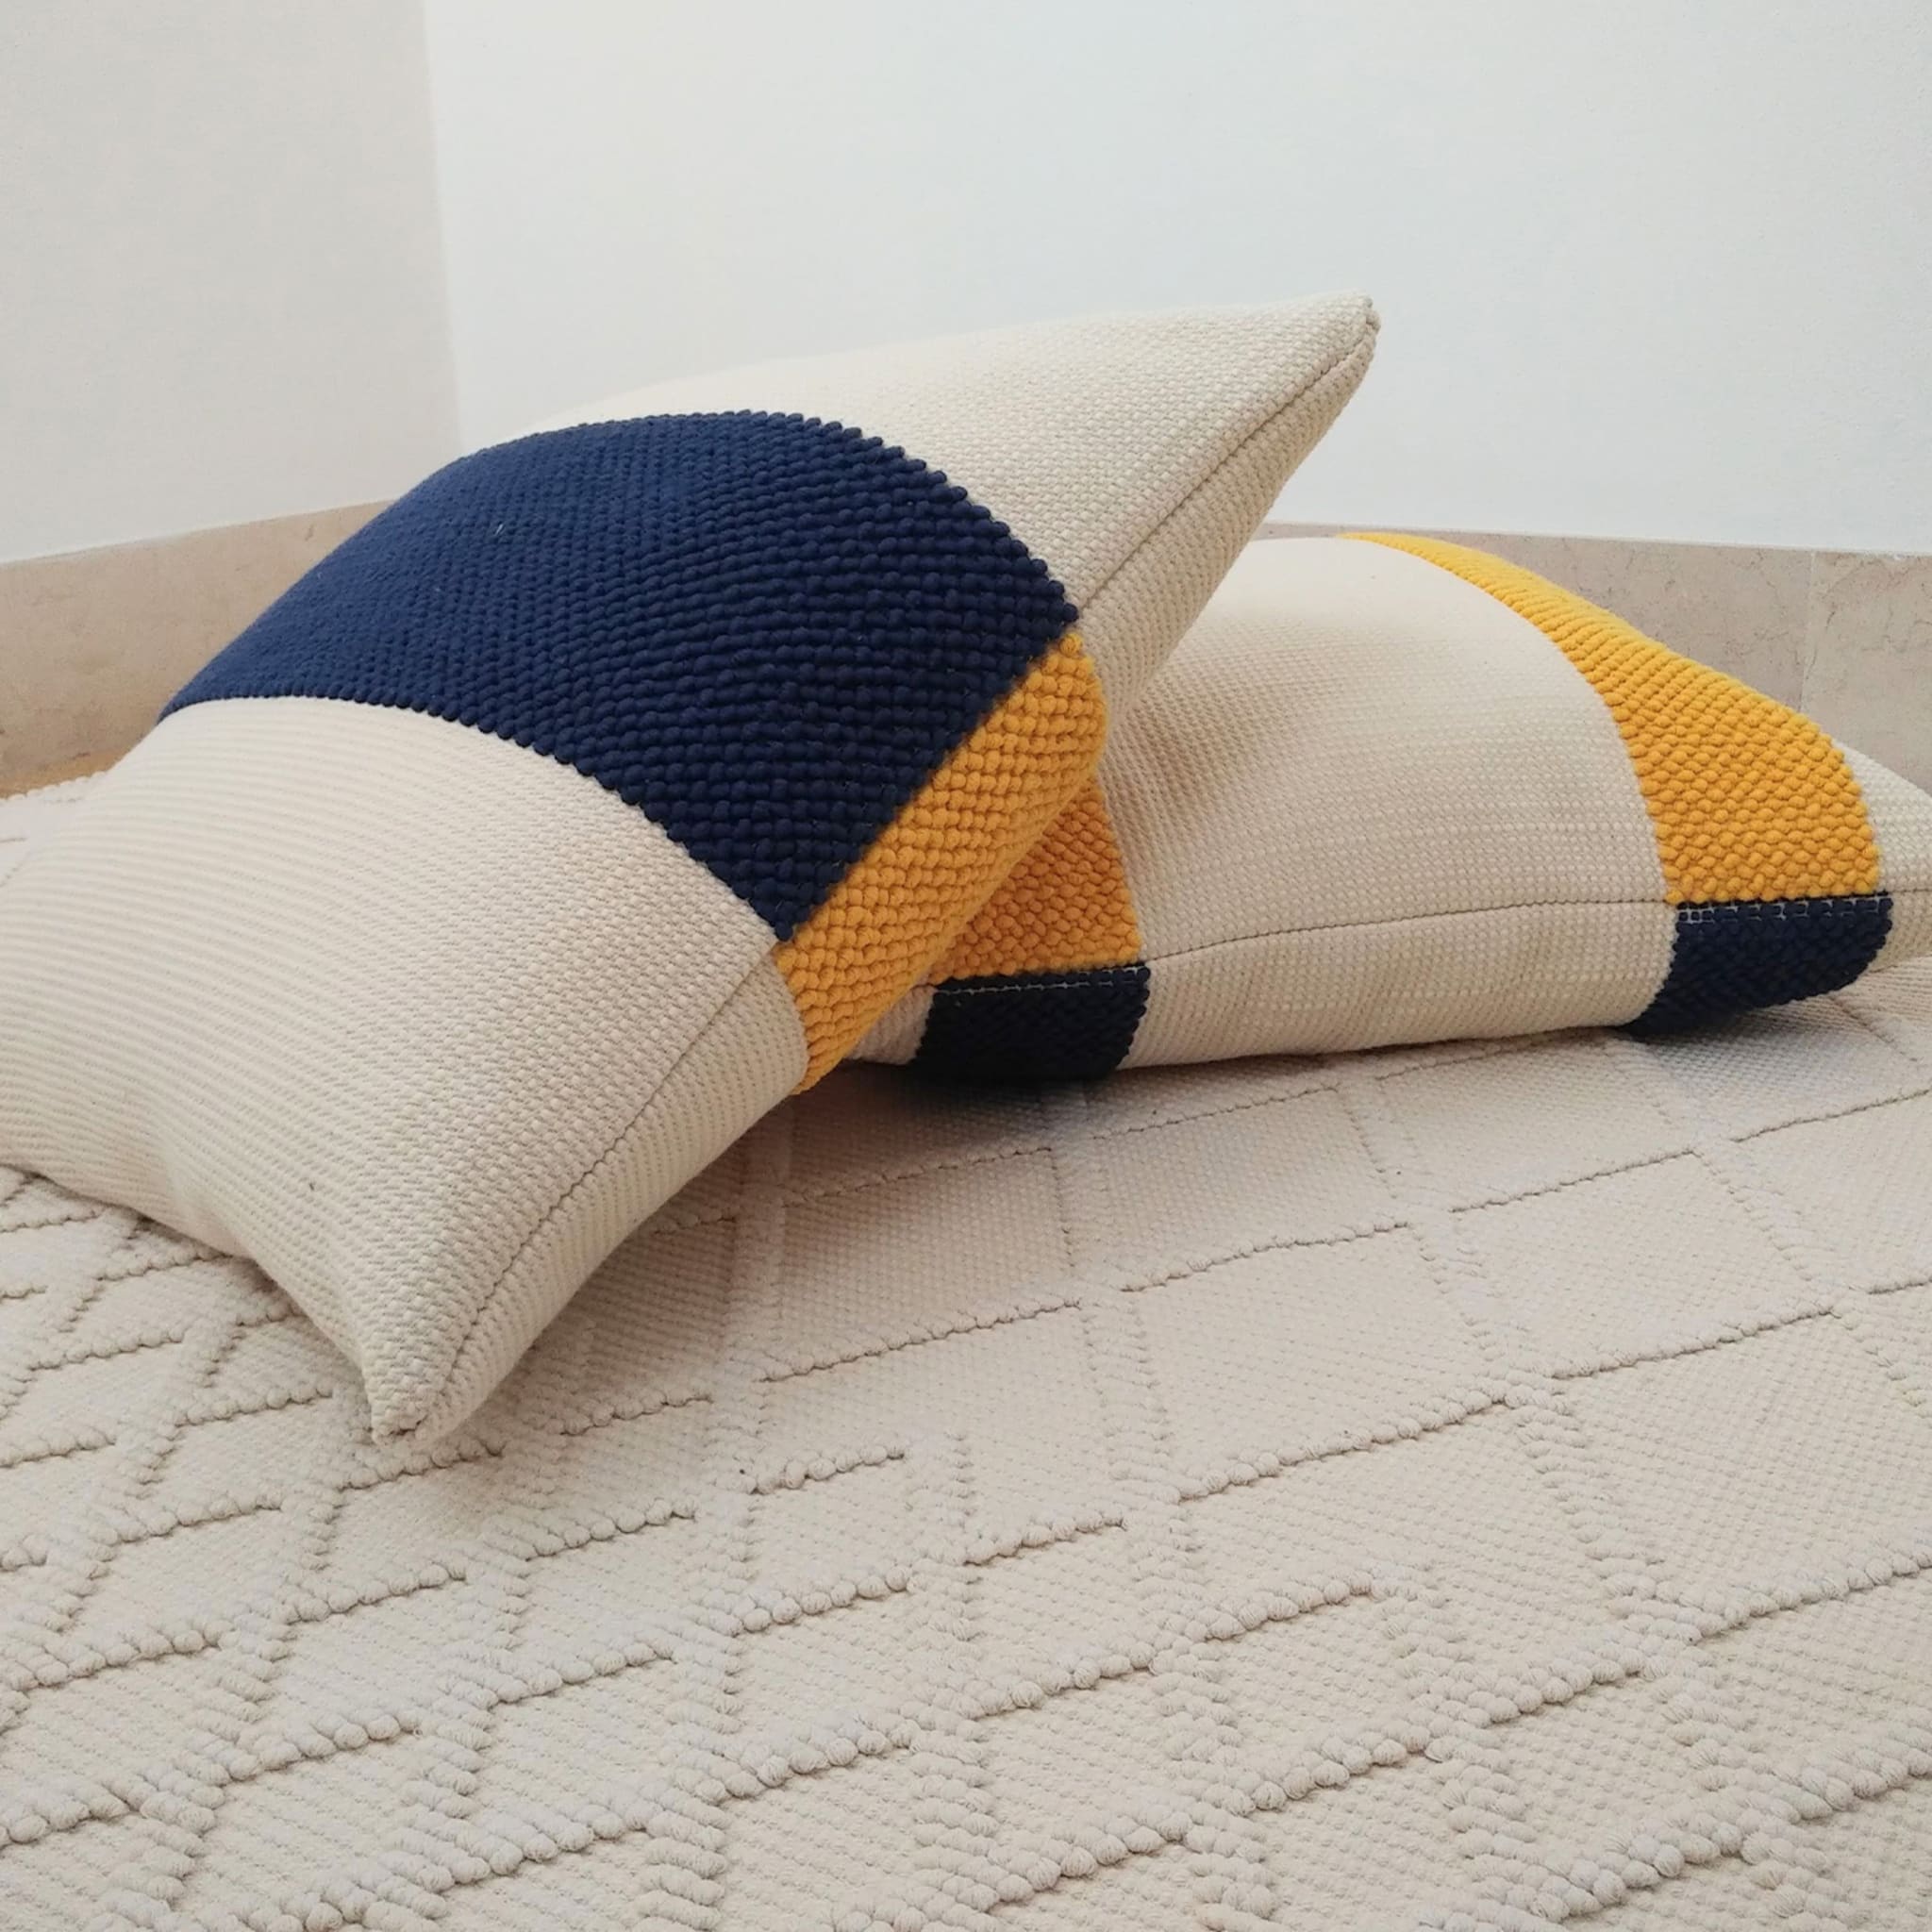 Ecru, Yellow, and Blue Double-Sided Cushion - Alternative view 1